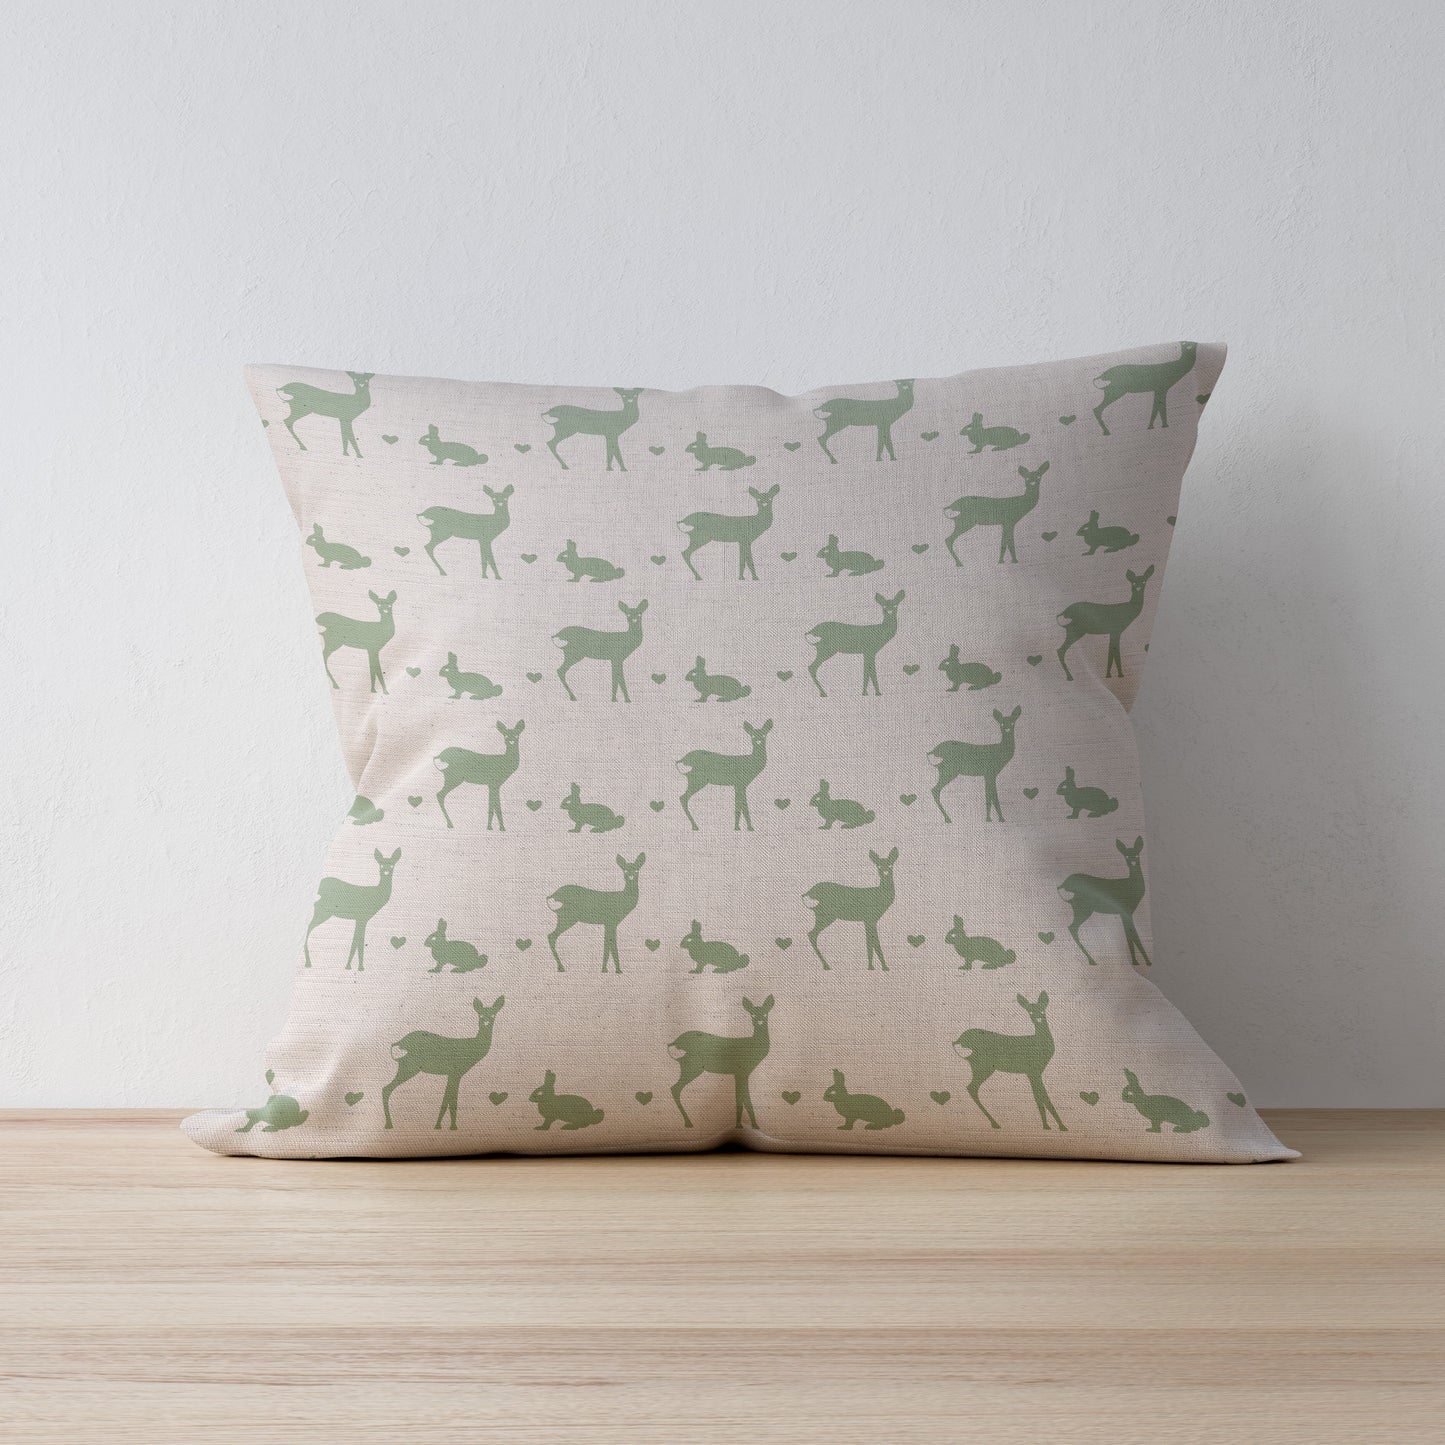 Deer and Rabbit Print Fabric - Country Home Decor - Handmade in Yorkshire by F&B and designed by F&B